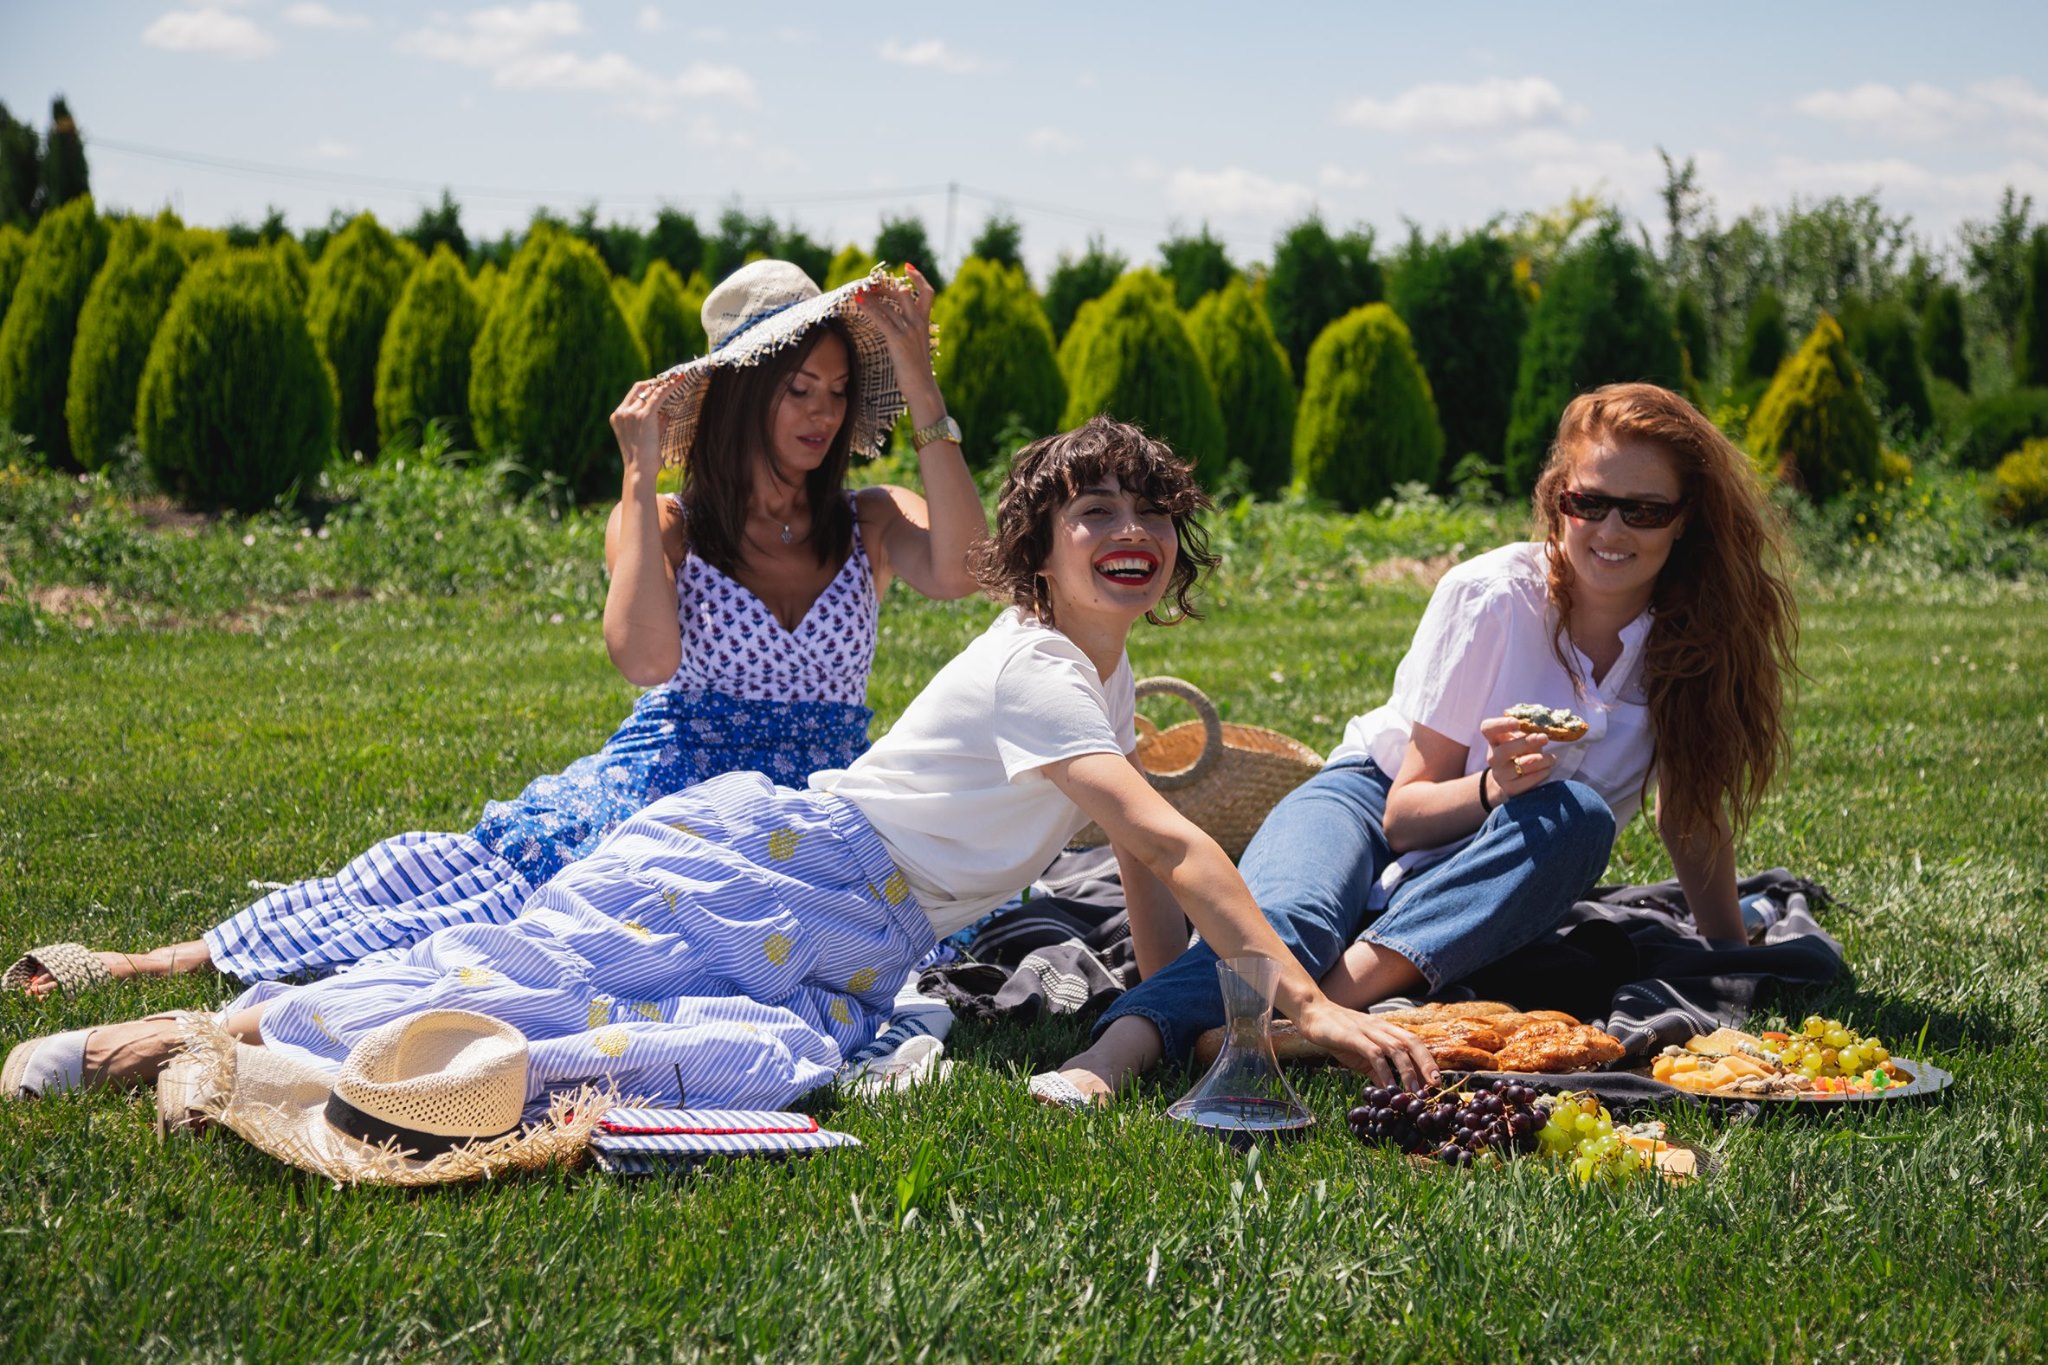 A fashionable summer picnic with a boat